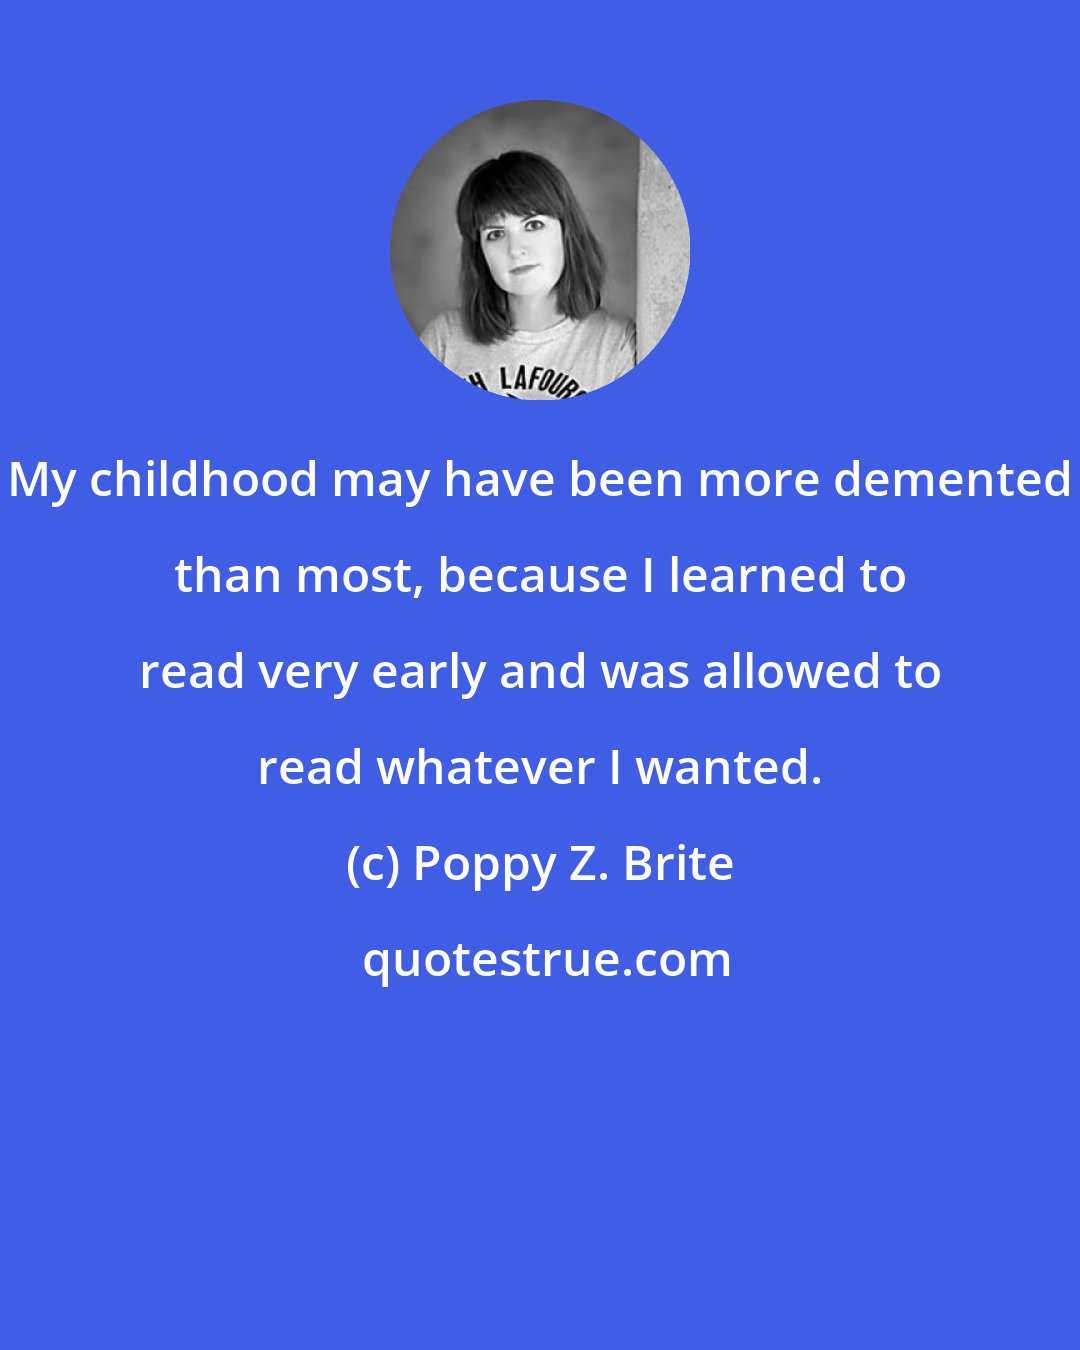 Poppy Z. Brite: My childhood may have been more demented than most, because I learned to read very early and was allowed to read whatever I wanted.